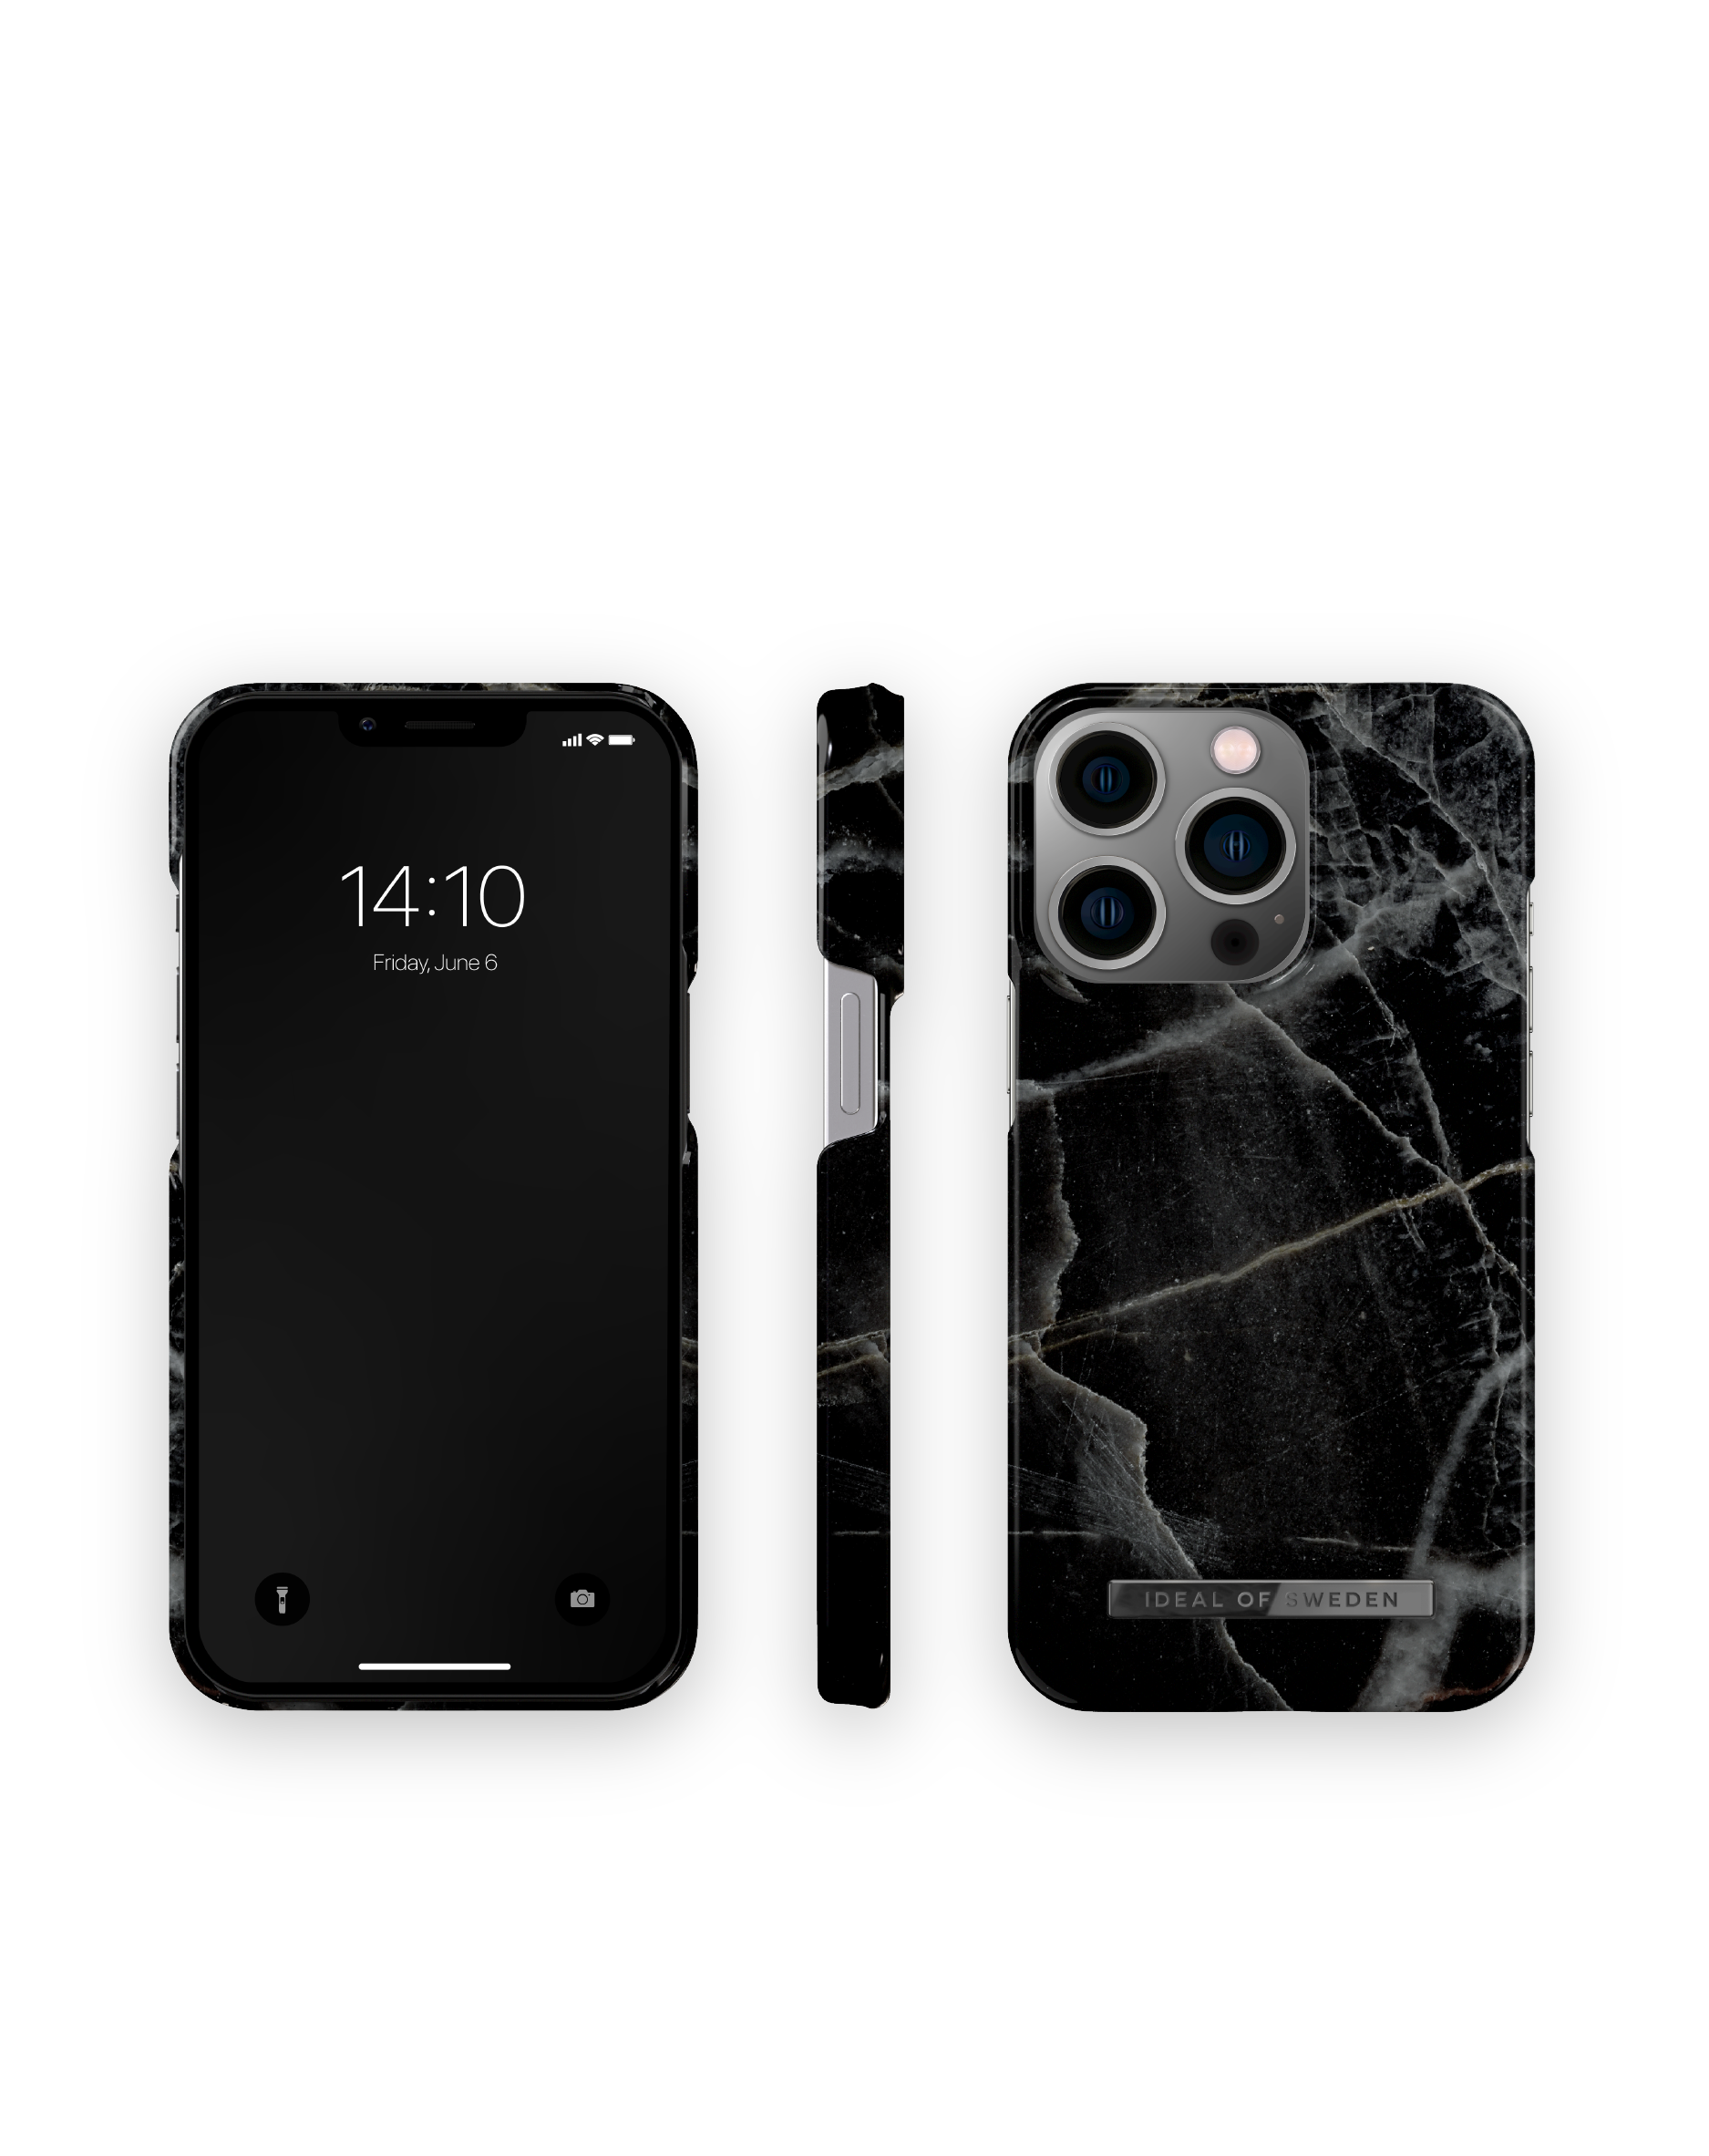 Pro, IDFCAW21-I2161P-358, 13 Black Apple, SWEDEN OF iPhone Backcover, Marble Thunder IDEAL